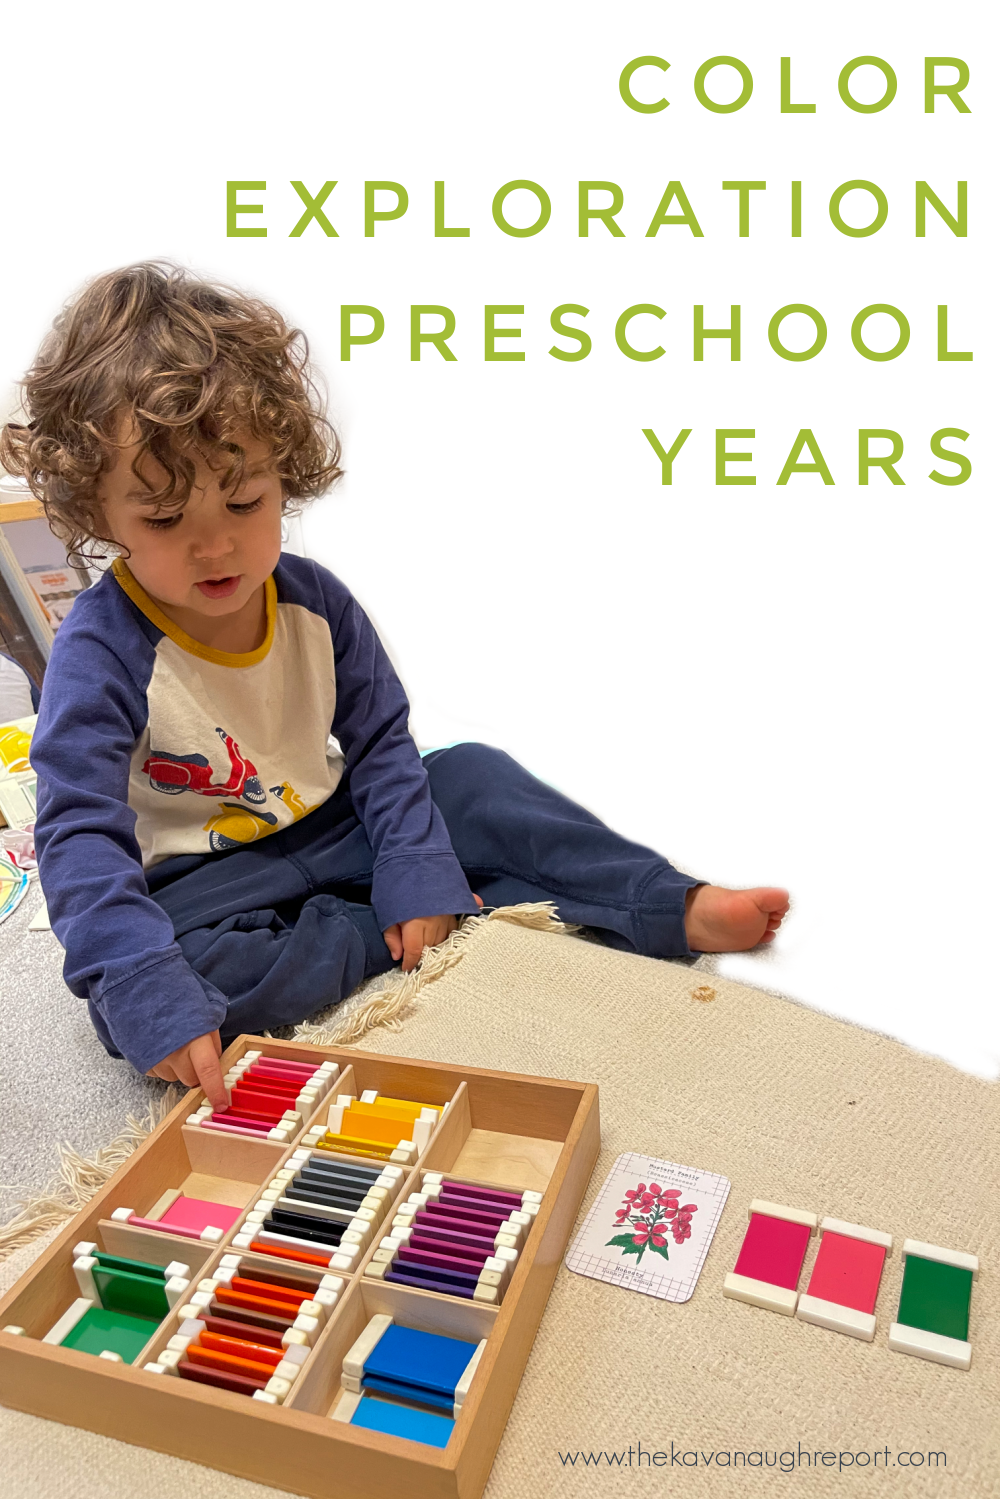 Montessori home. Here's a look at activity ideas for 4-year-olds that explore colors more deeply.